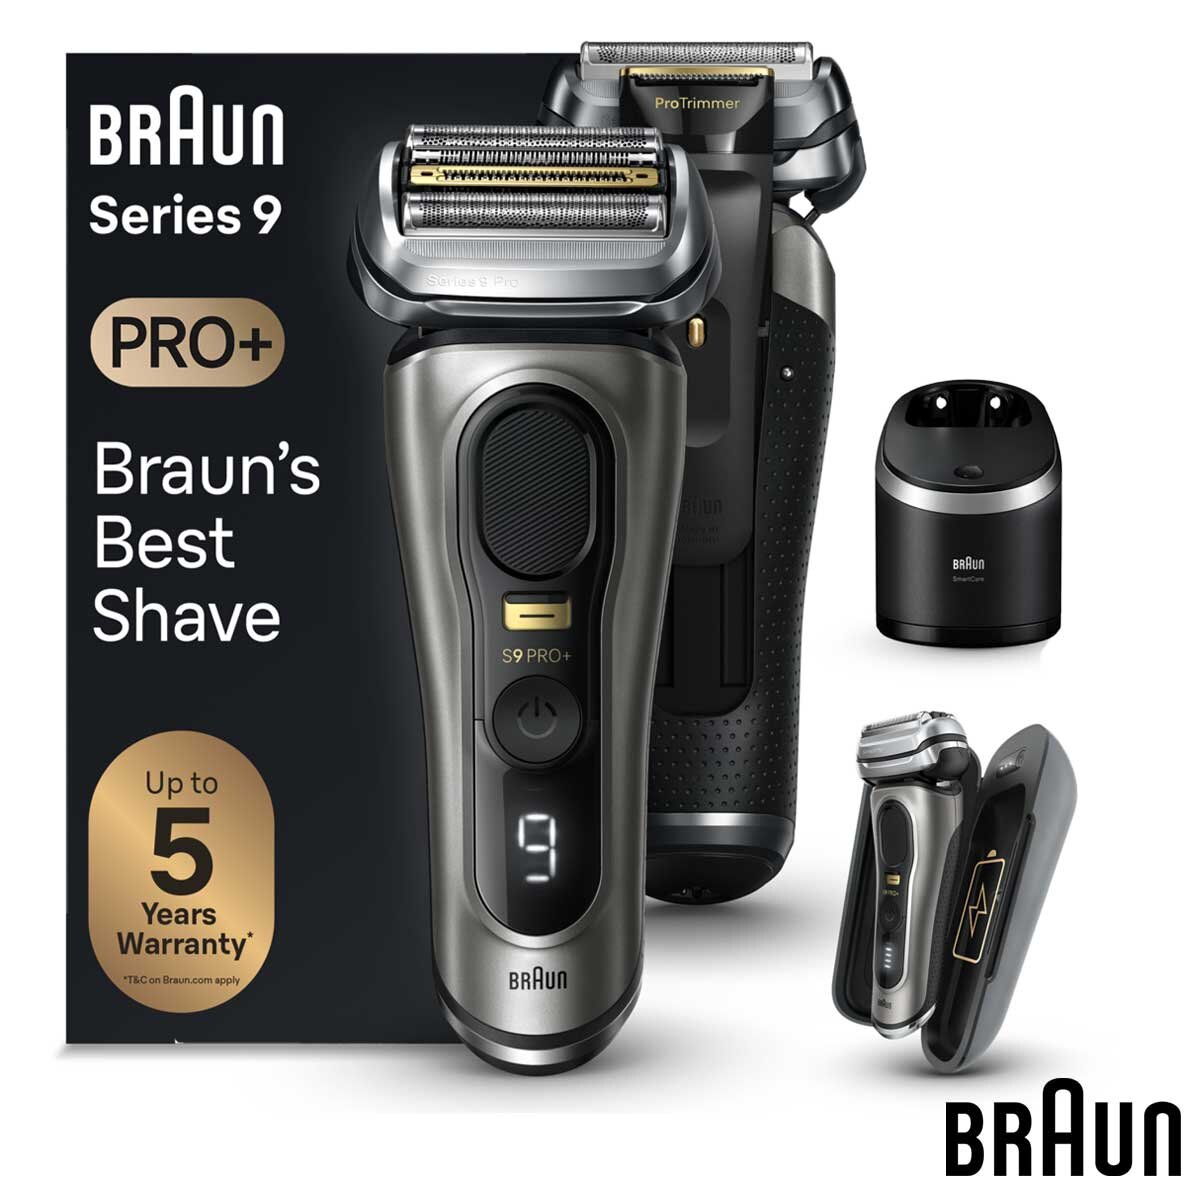 Image of Braun shaver and accessories